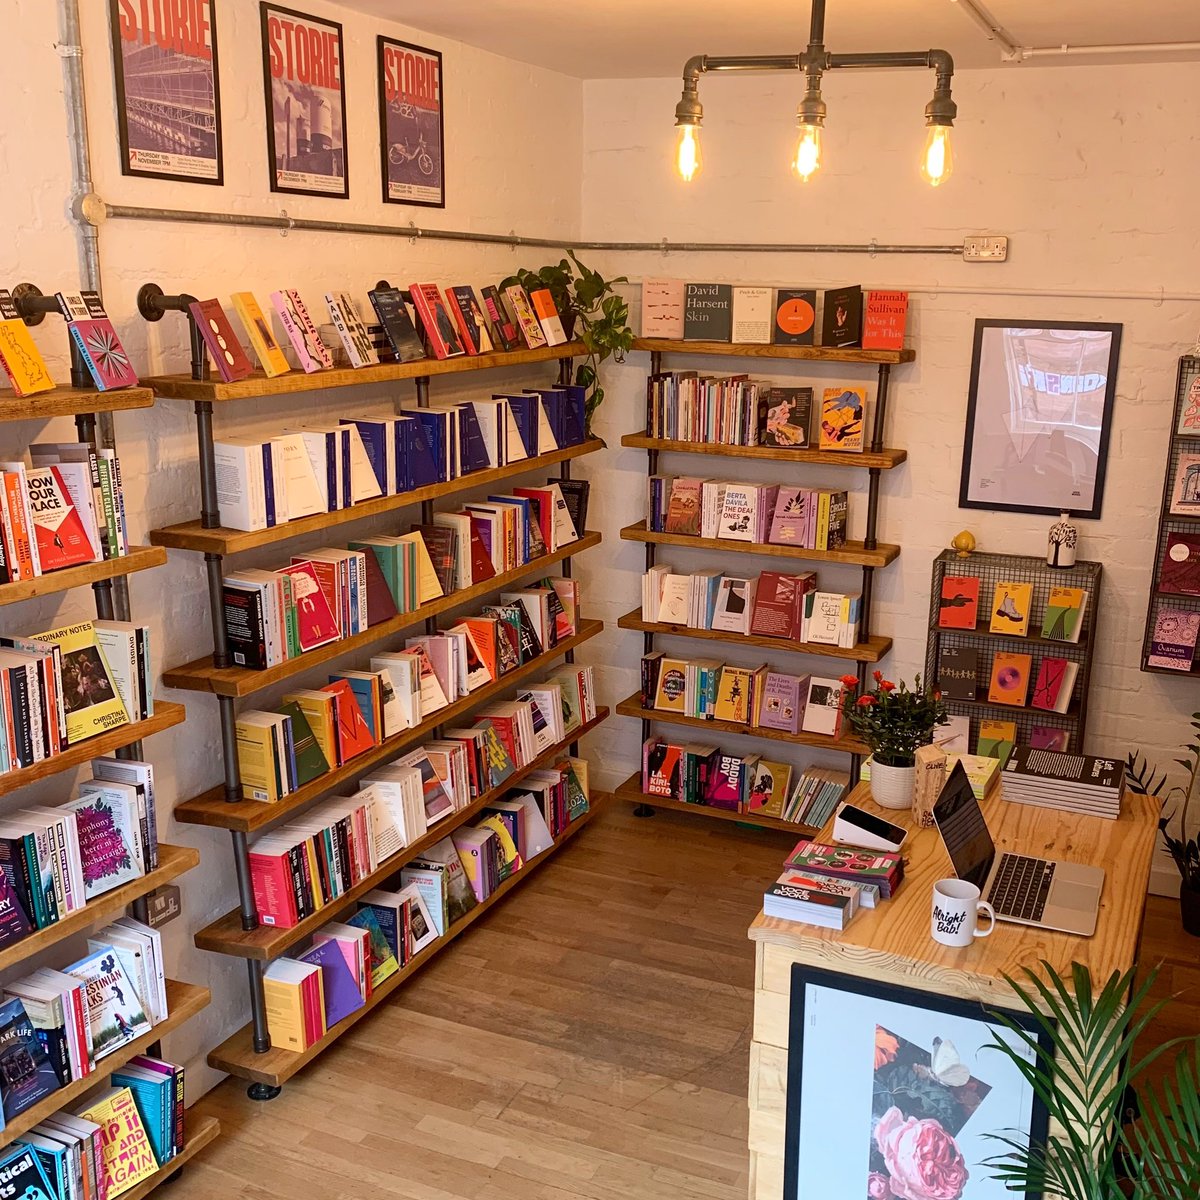 “Bookselling gave me so much, it’s widened my horizons & given me so many different skills.”

Birmingham’s @vocebooks co-owners Clive & Maria joined us for this week’s #BookshopSpotlight to take us on a tour of their little book-corner of the world. 

Full interview tomorrow! 📚